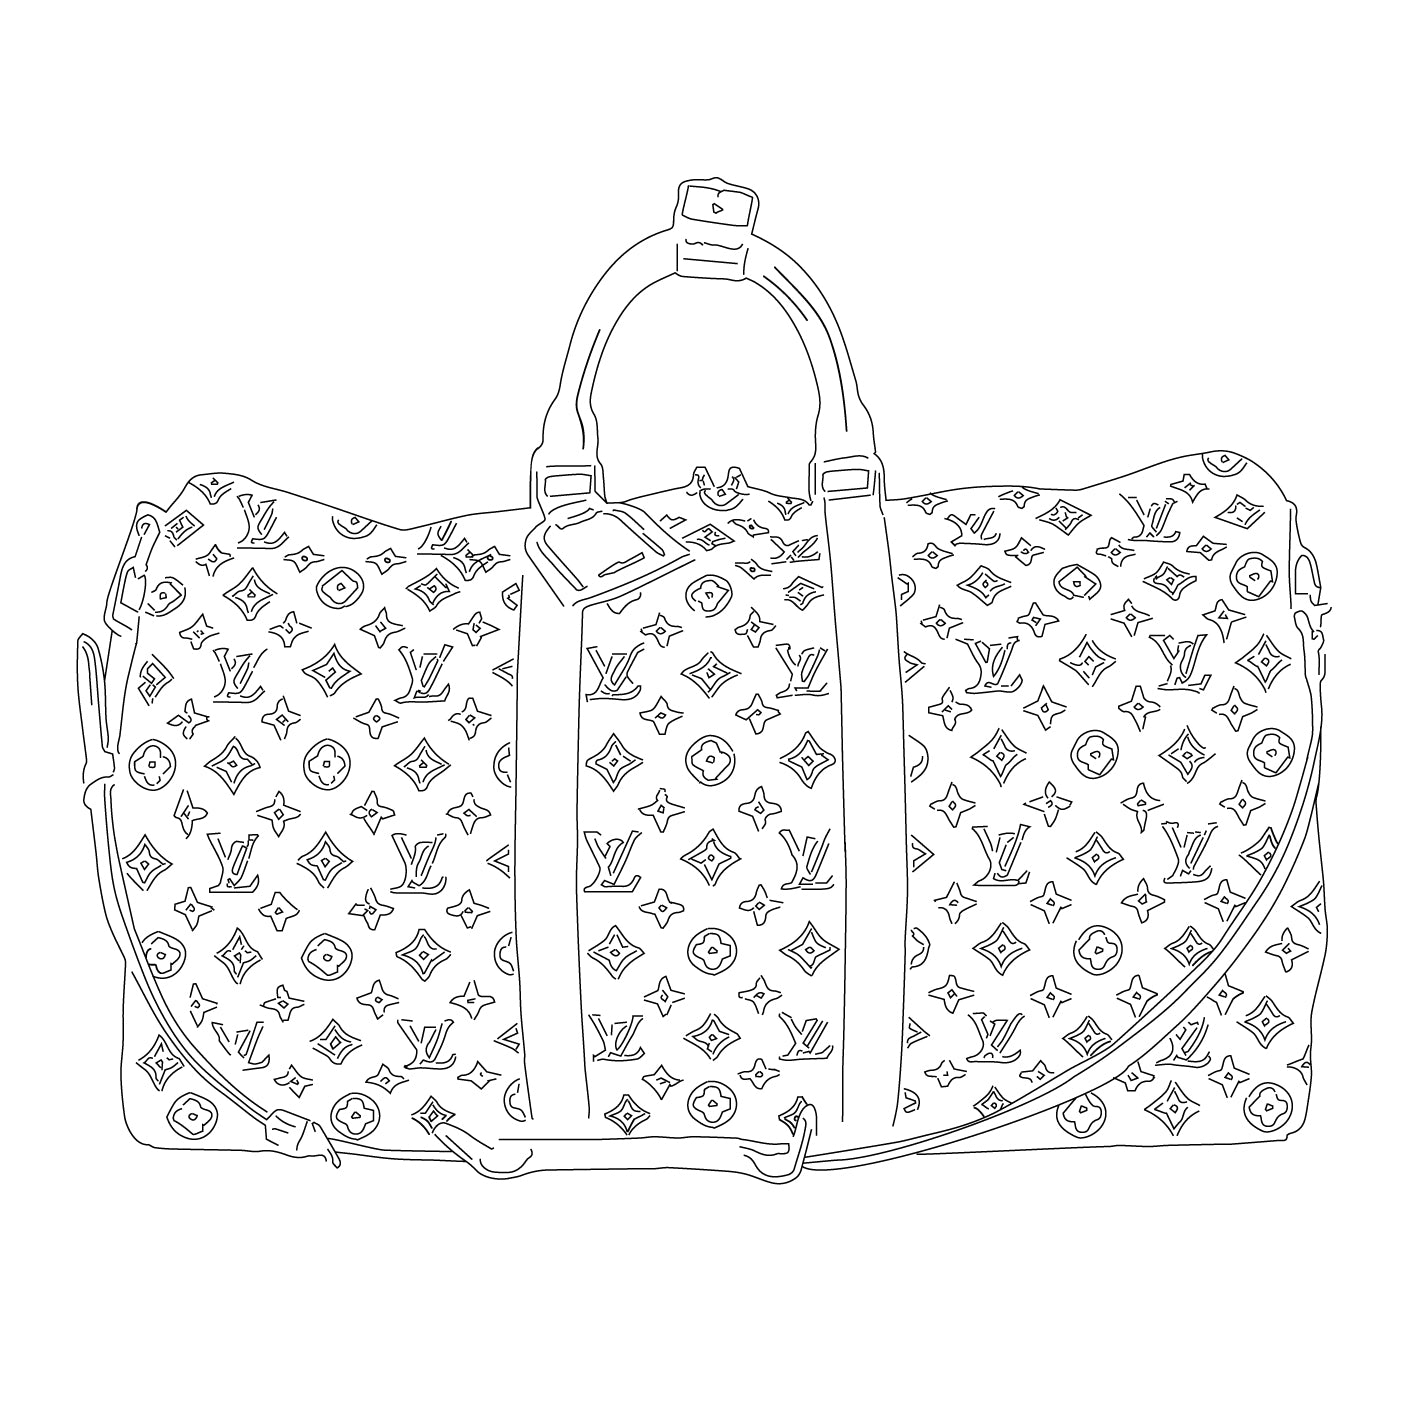 Louis Vuitton Keepall Sizes - CoolSpotters